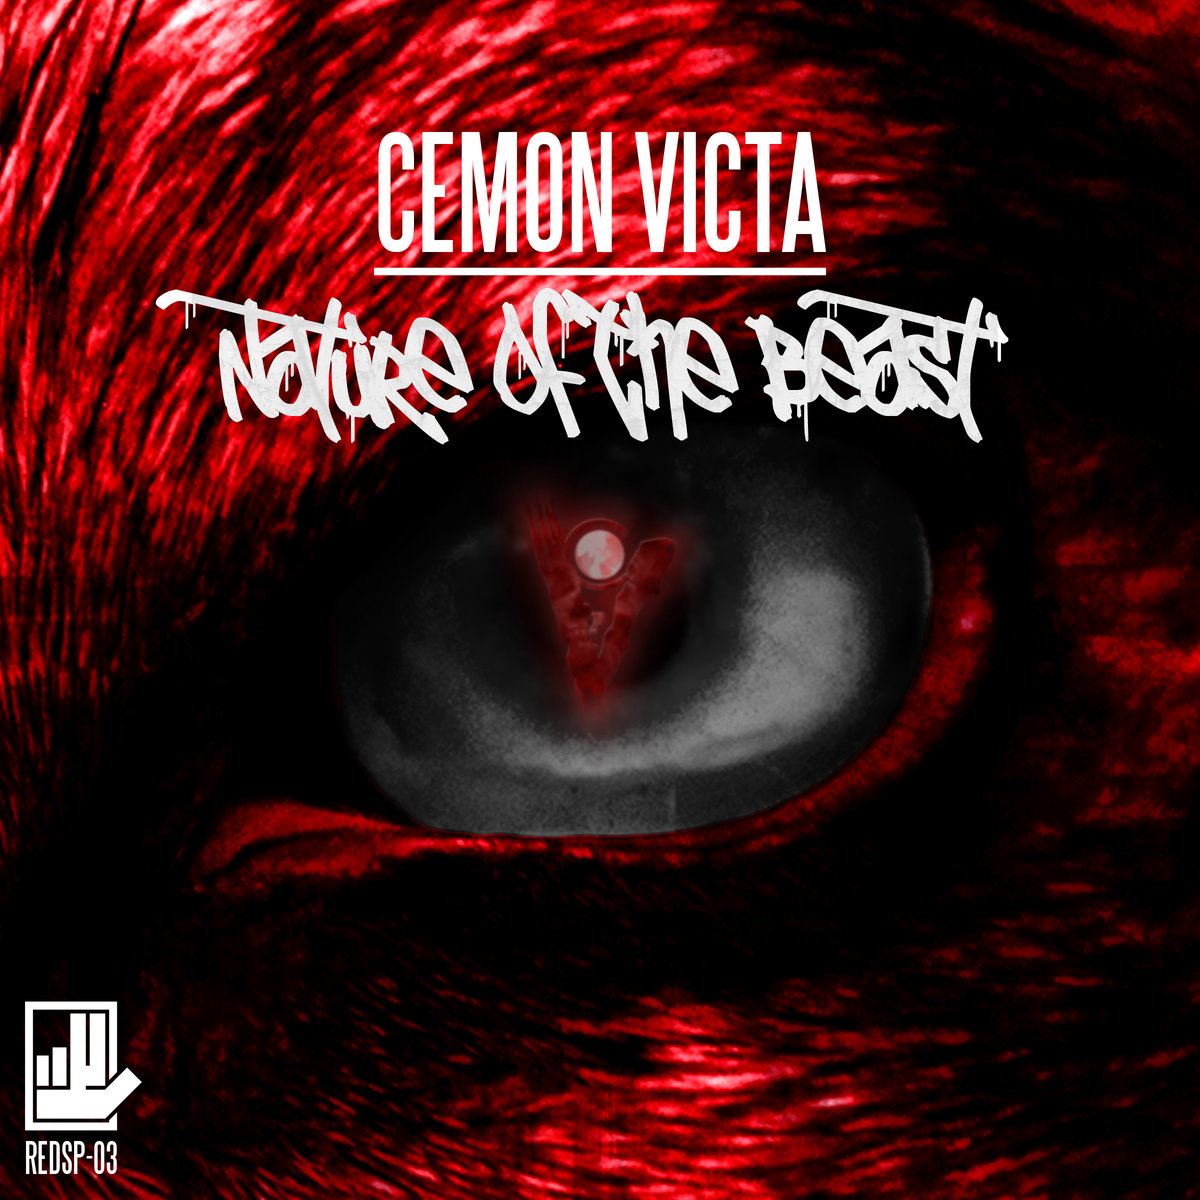 Cemon Victa - Nature Of The Beast @ 'Nature Of The Beast' album (electronic, cemon victa)